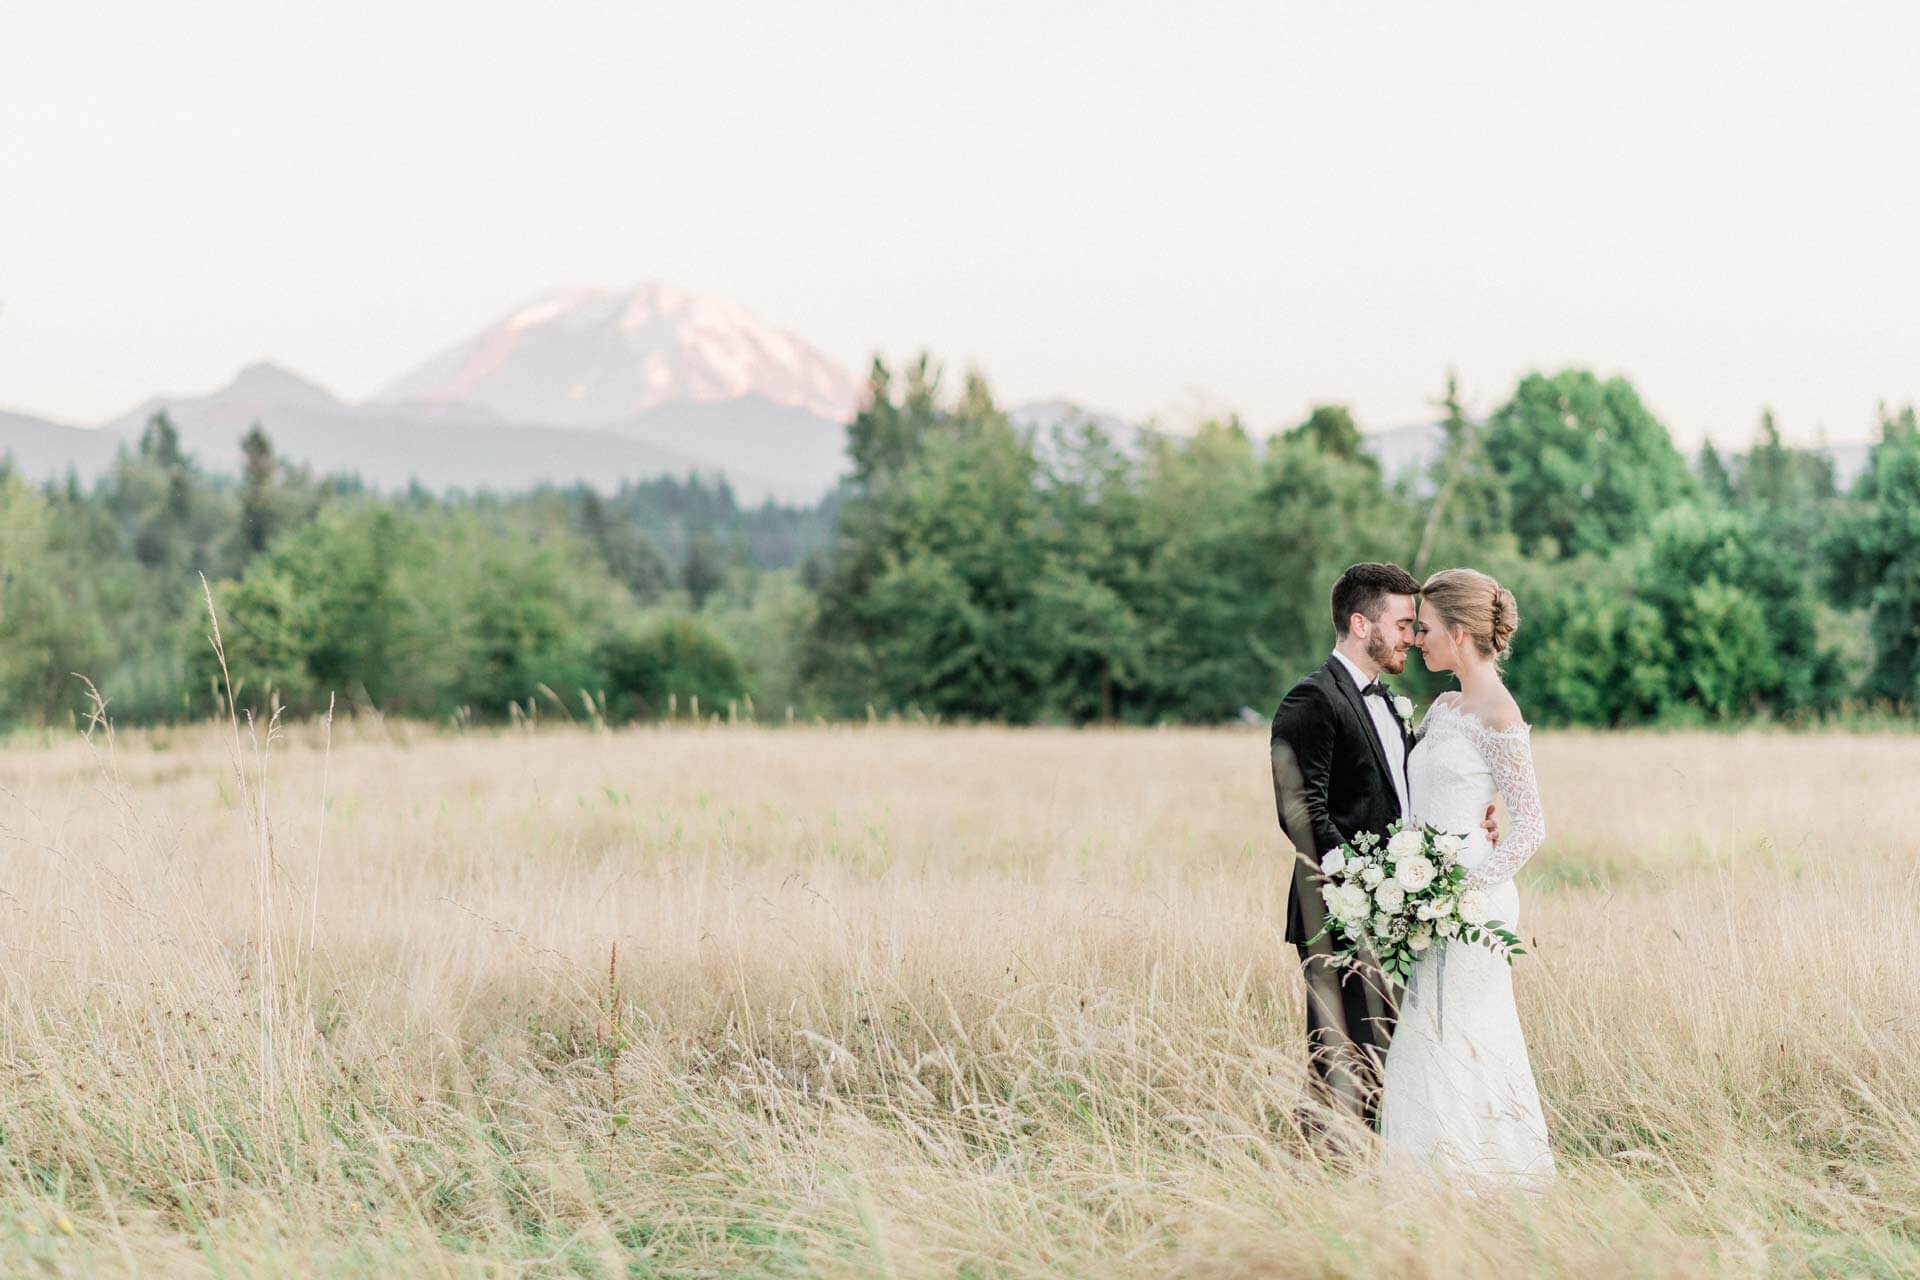 French Countryside Wedding Inspiration Bride and Groom in hayfield with Mount Rainier View